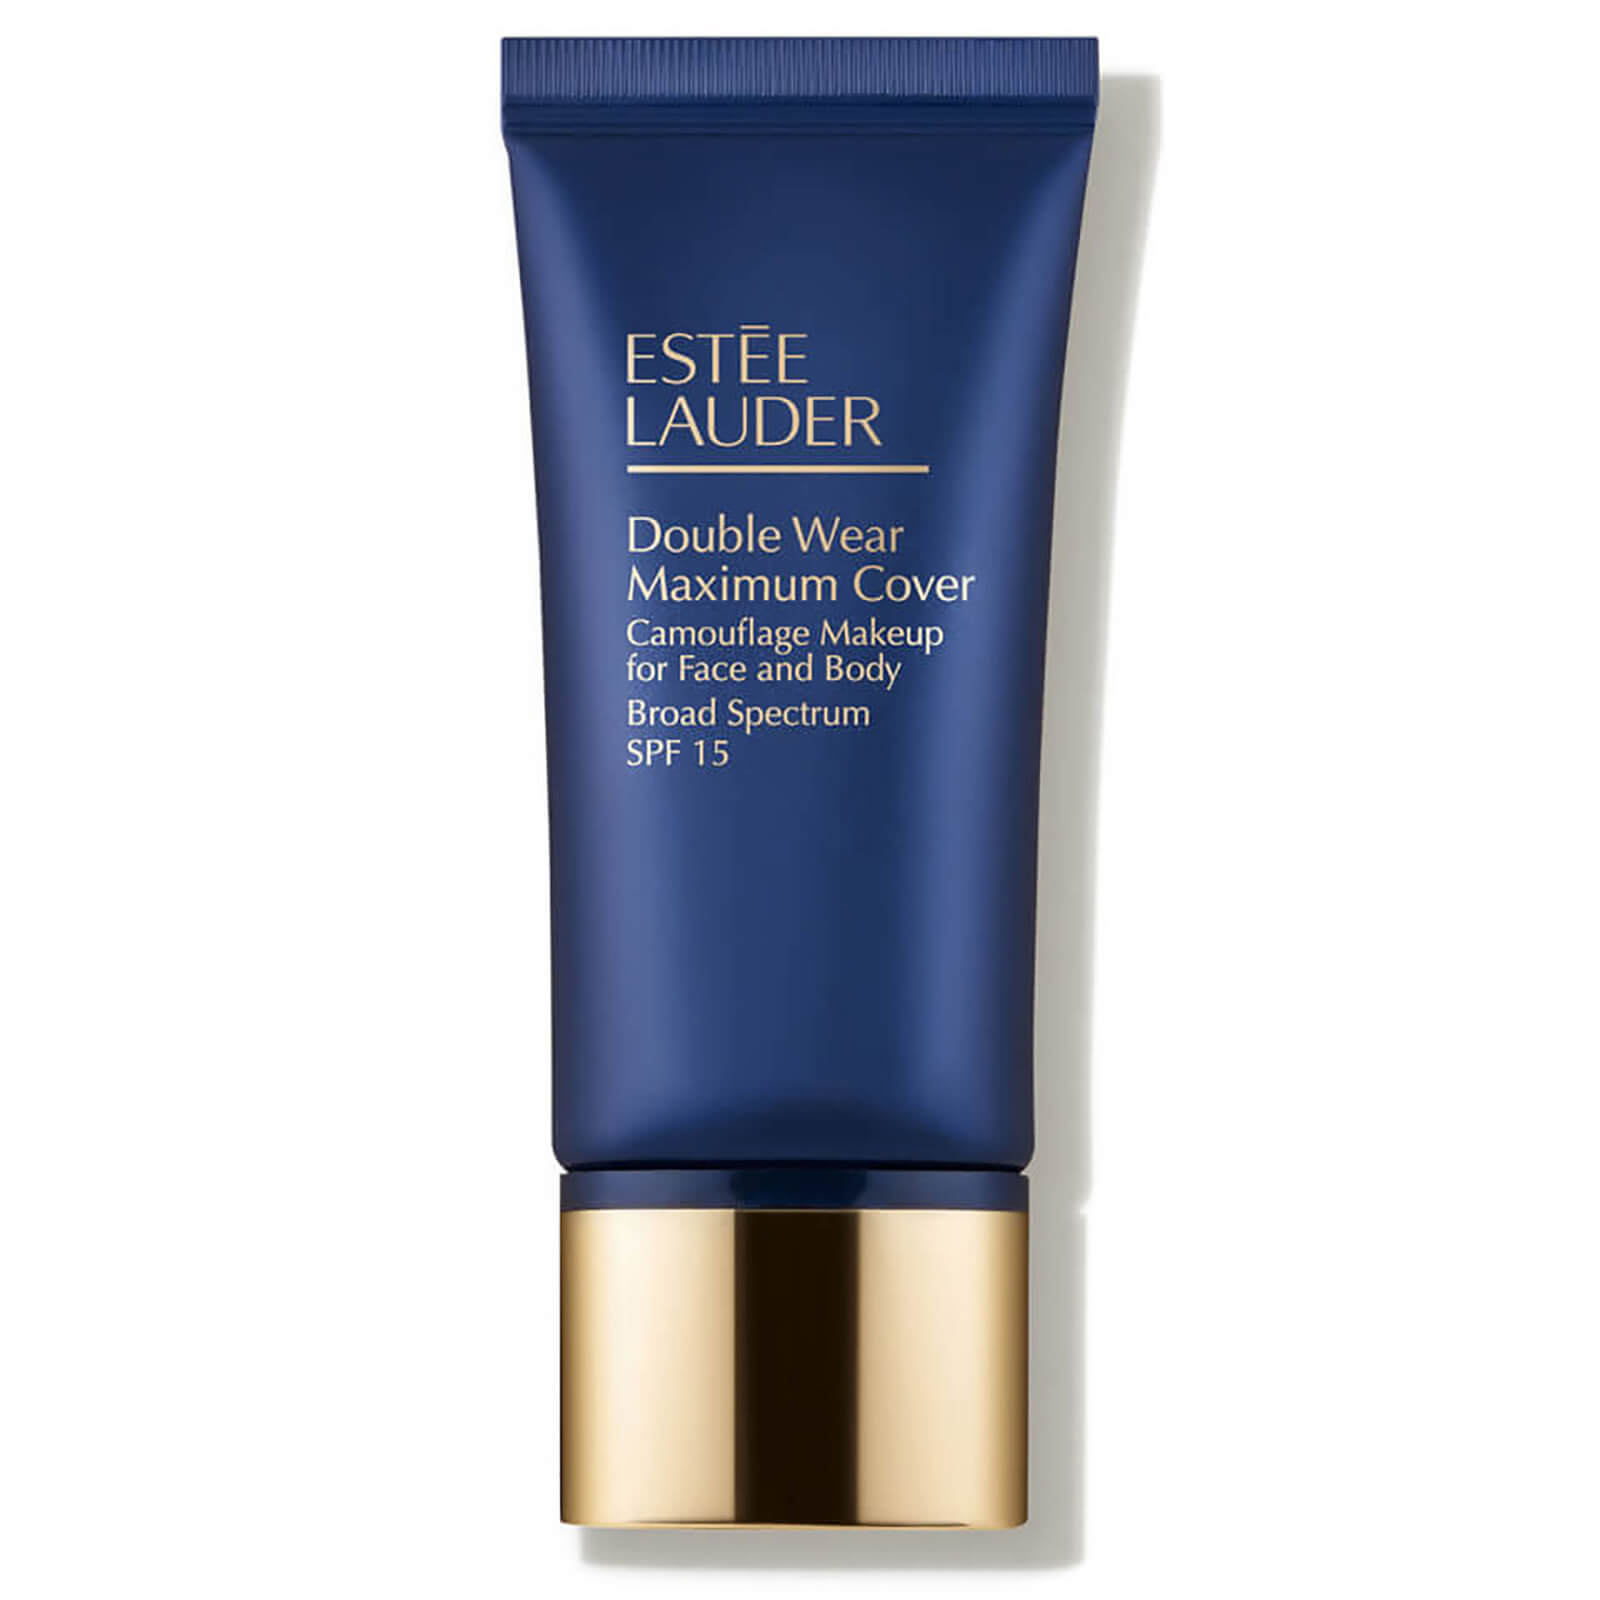 Estée Lauder Double Wear Maximum Cover Camouflage Makeup For Face And Body Spf 15 (1 Oz.) In 5w2 Rich Caramel